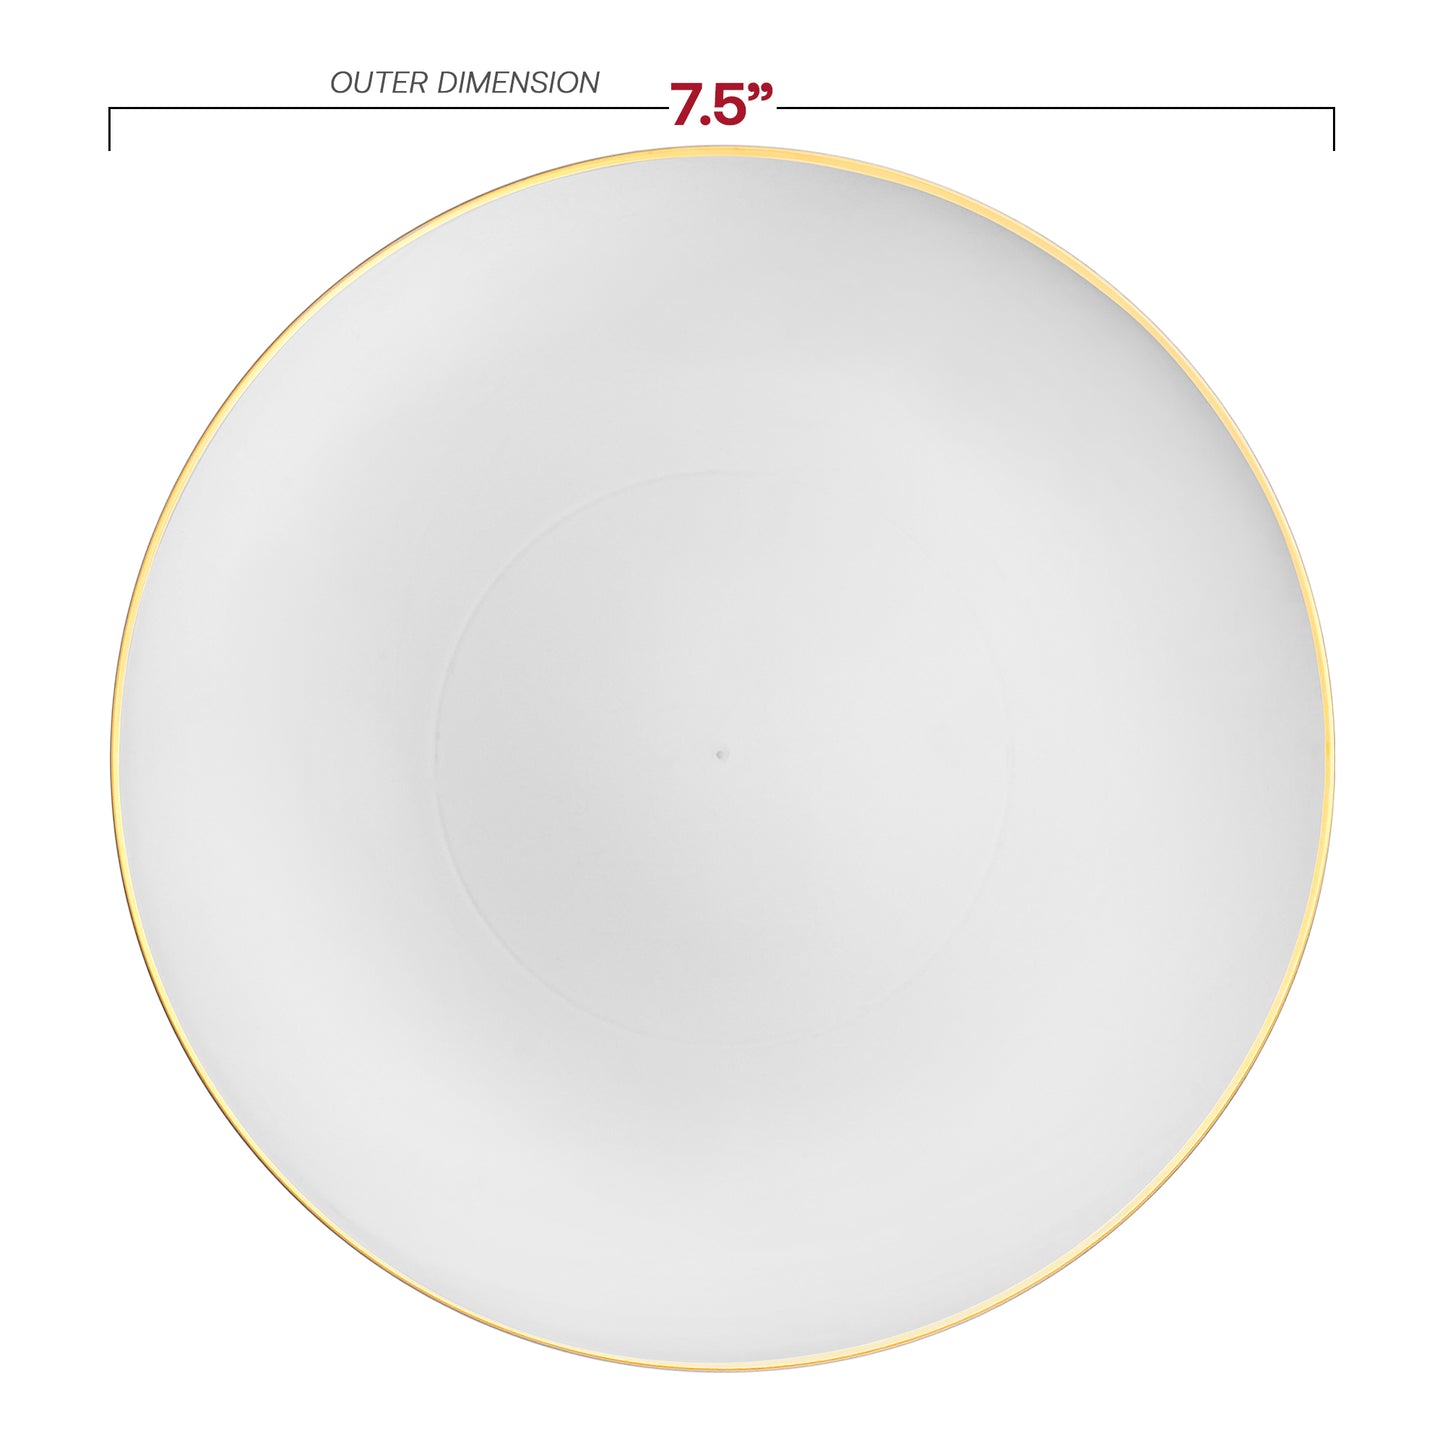 White with Gold Rim Organic Round Disposable Plastic Appetizer/Salad Plates (7.5") Dimension | The Kaya Collection